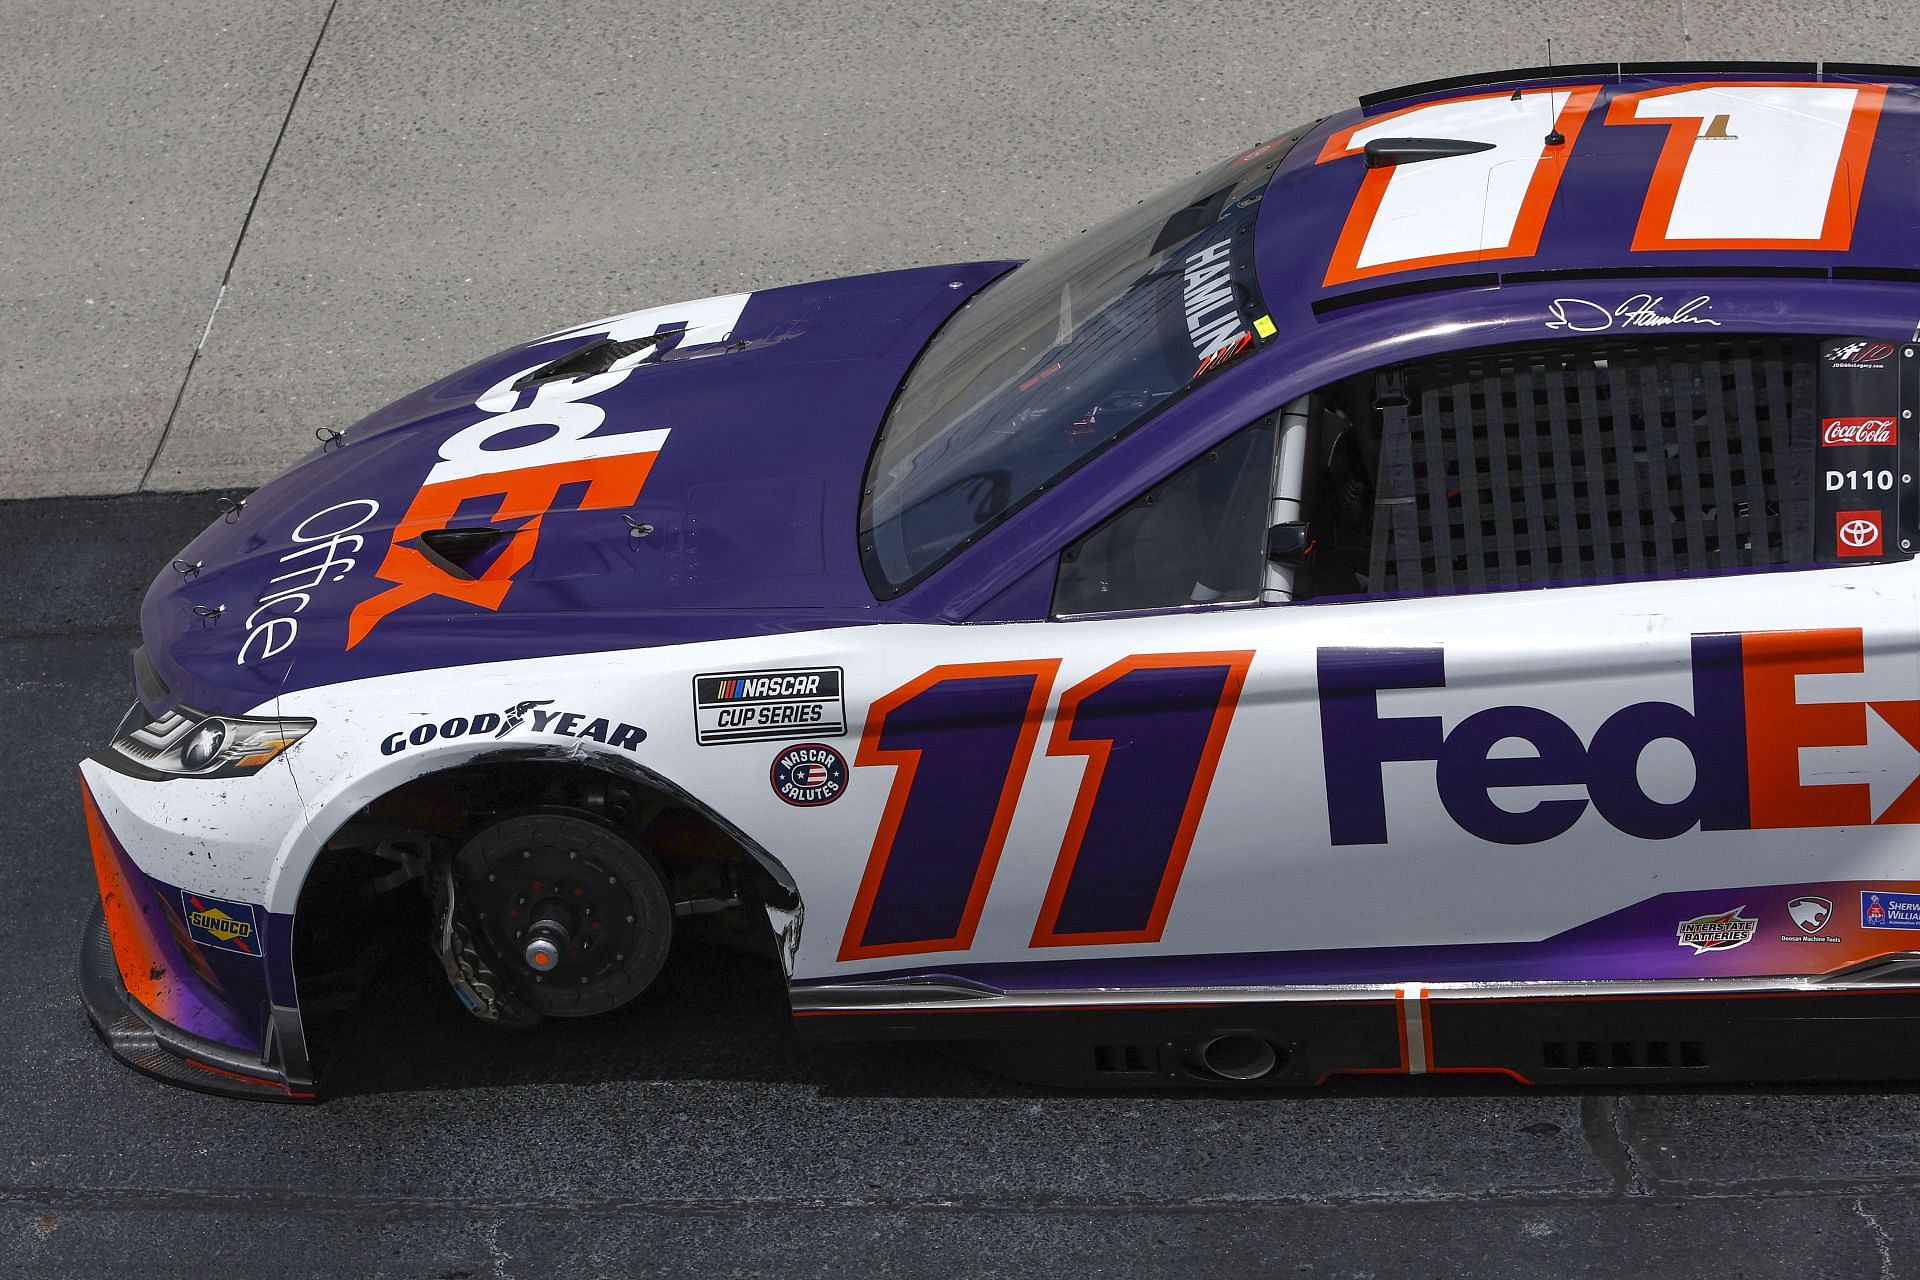 Denny Hamlin drives without the left front tire after a pit stop during the 2022 NASCAR Cup Series DuraMAX Drydene 400 presented by RelaDyne at Dover Motor Speedway in Dover, Delaware (Photo by Sean Gardner/Getty Images)